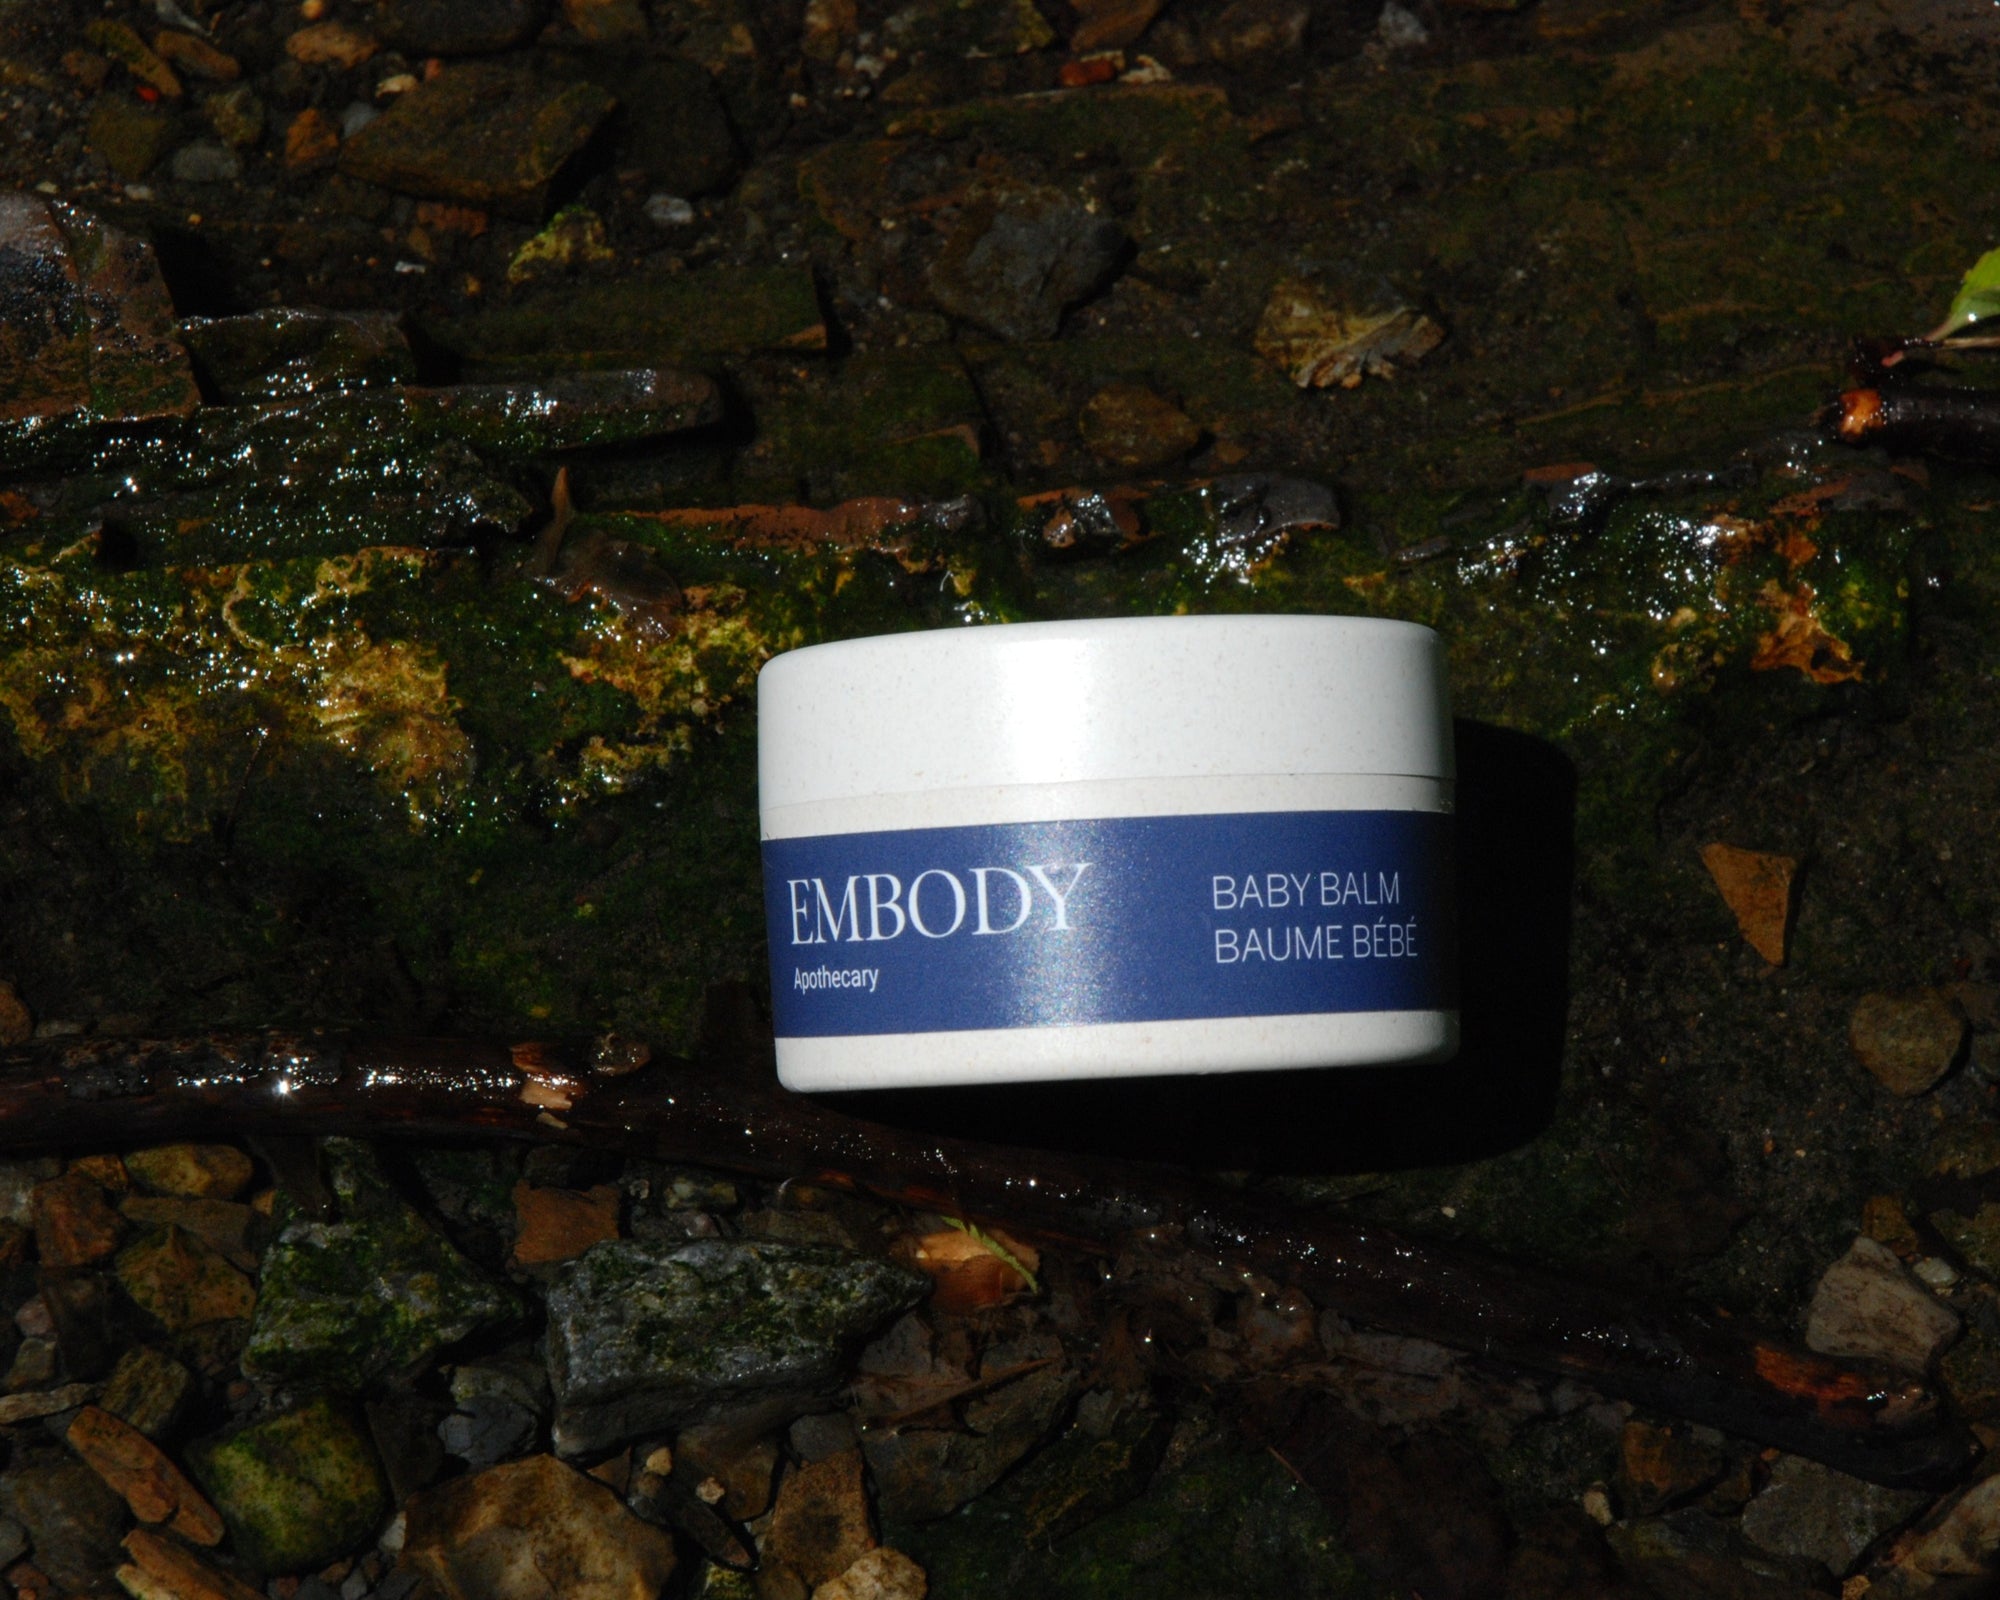 Baby balm sitting in a river.